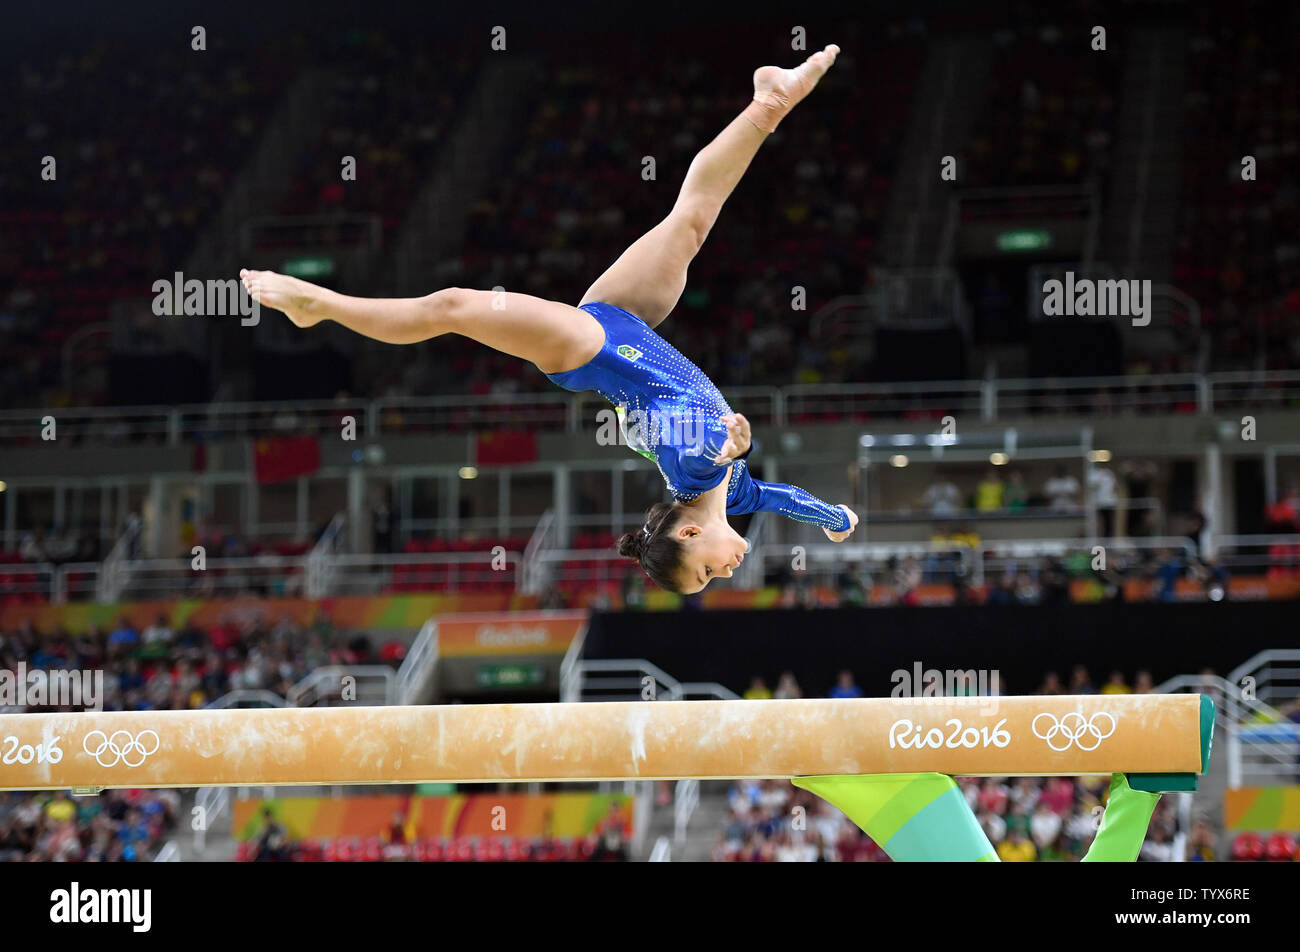 Brazil's Flavia Saraiva competes on the balance beam during the Women's Artistic Gymnastics finals of the 2016 Rio Summer Olympics in Rio de Janeiro, Brazil, August 9, 2016. Photo by Kevin Dietsch/UPI Stock Photo